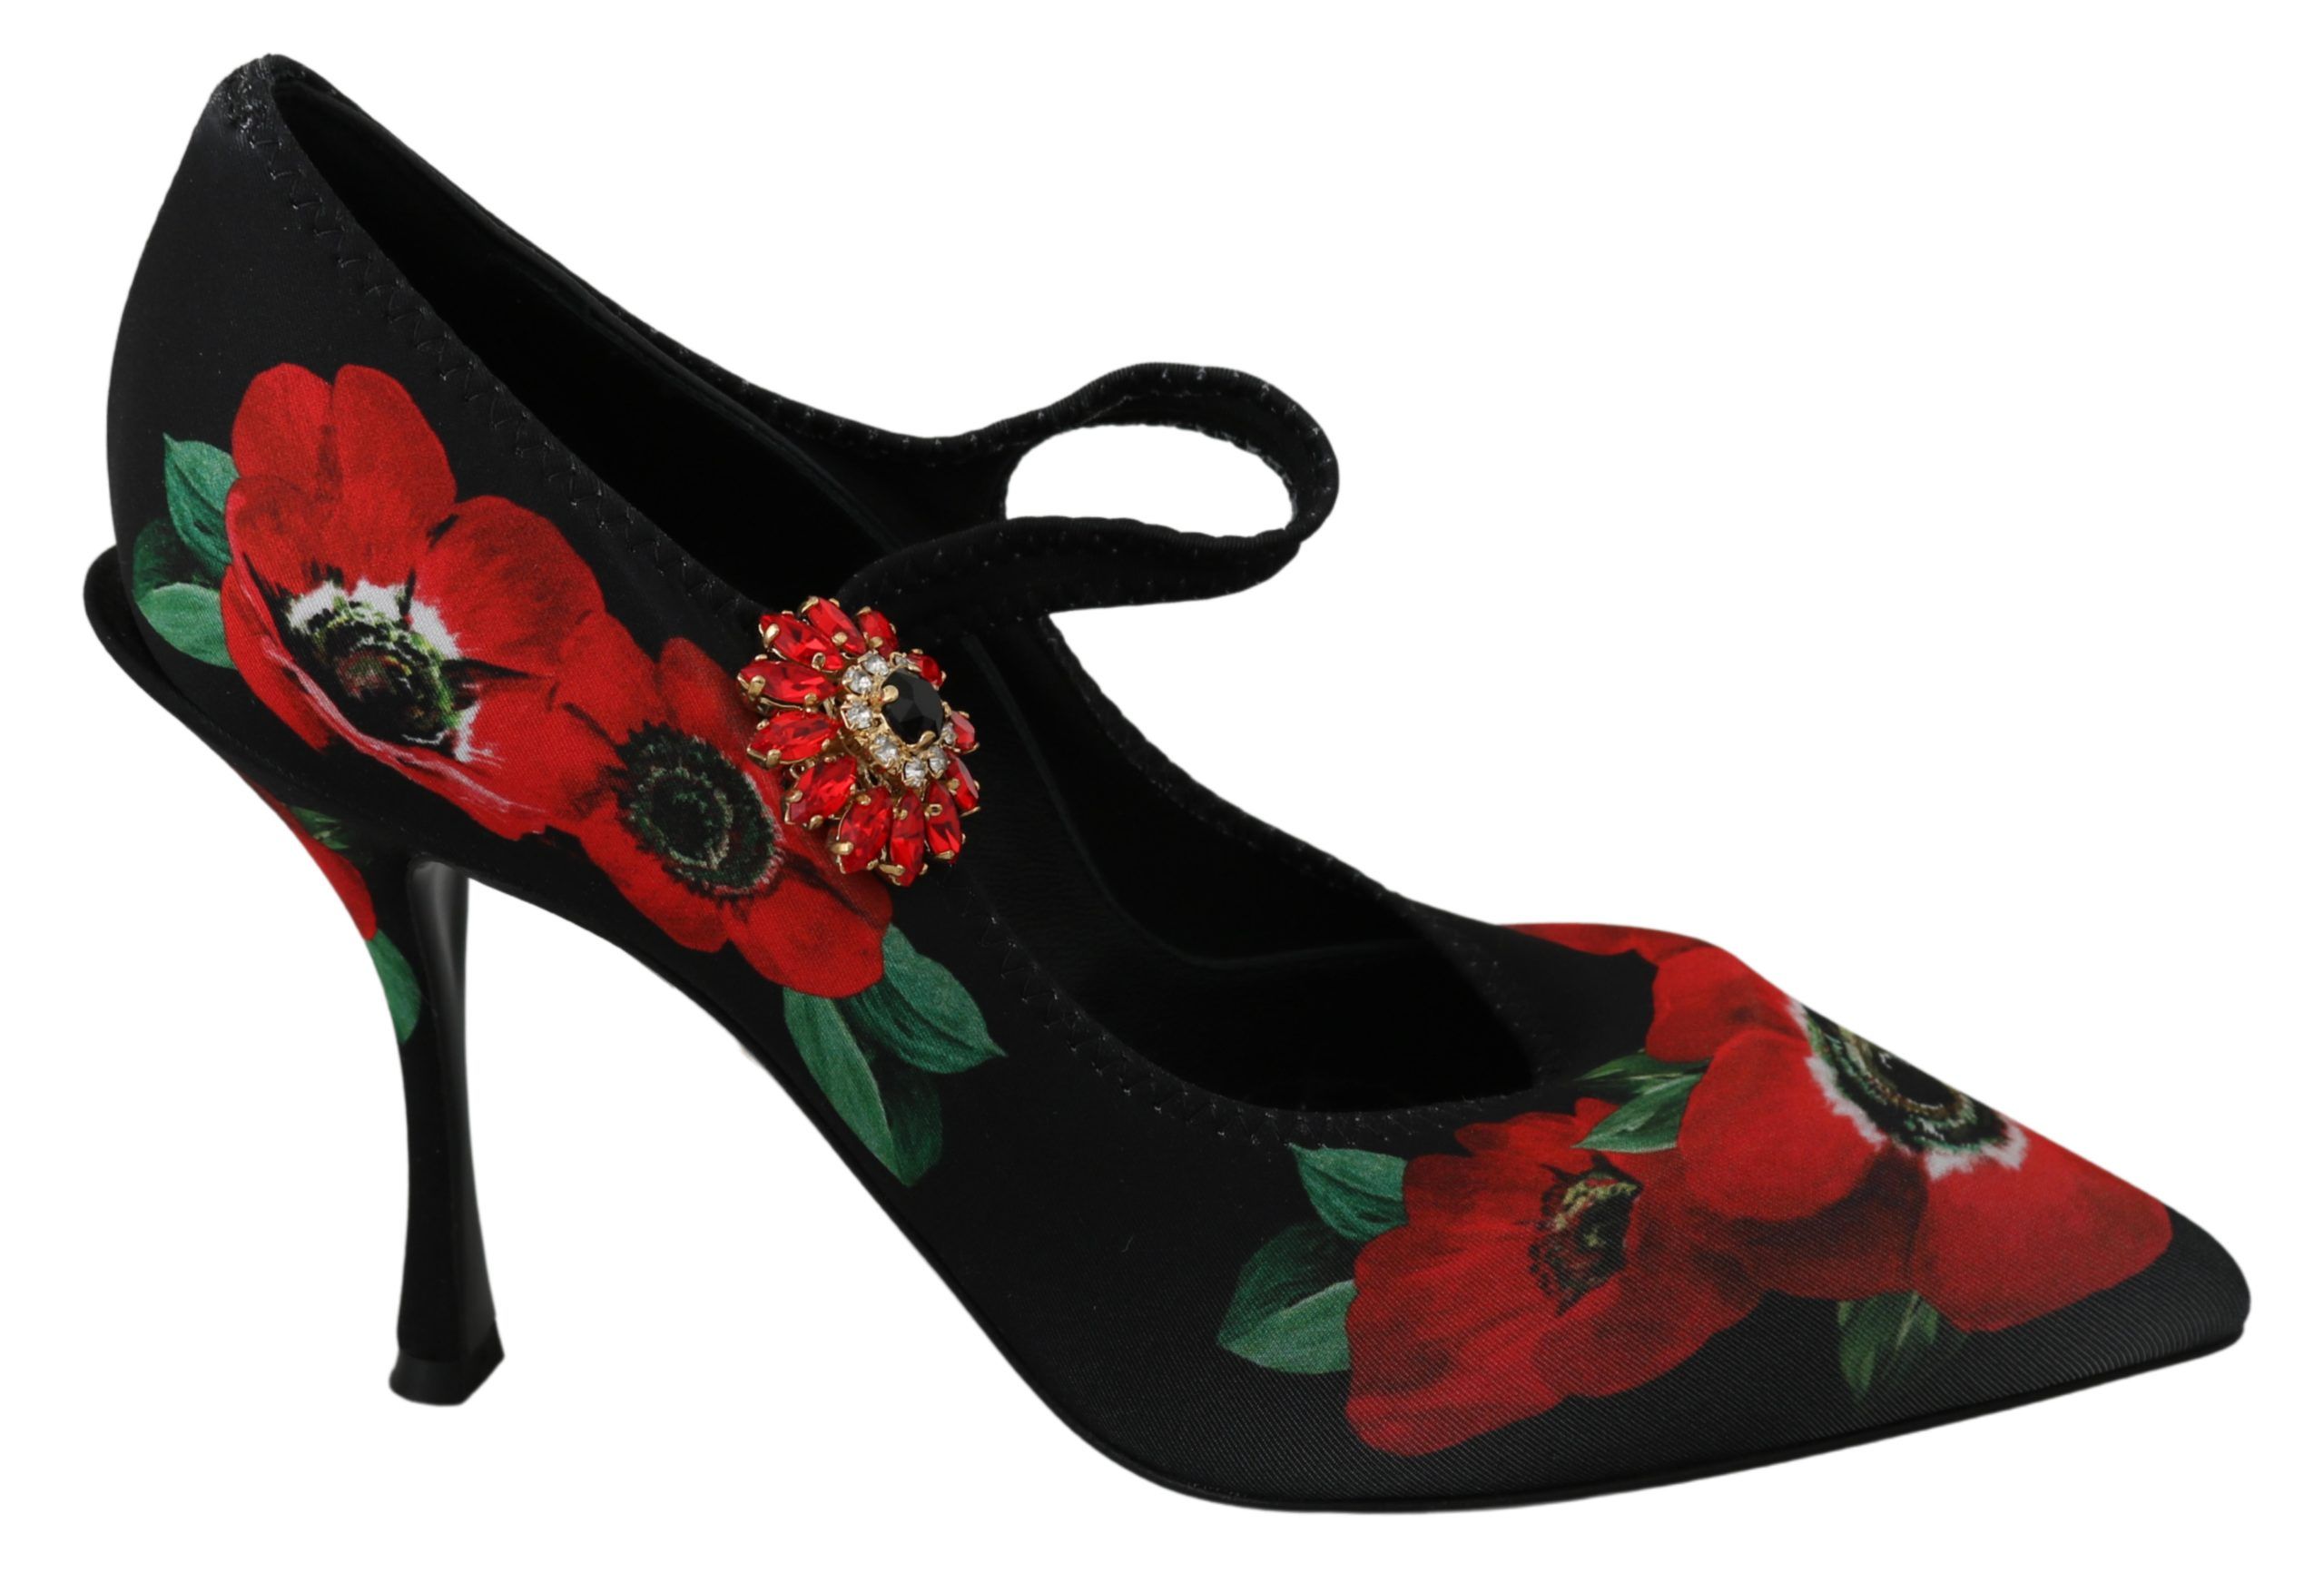 Red Dolce & Gabbana Floral Mary Janes Pumps with Crystal Detail EU35/US4.5